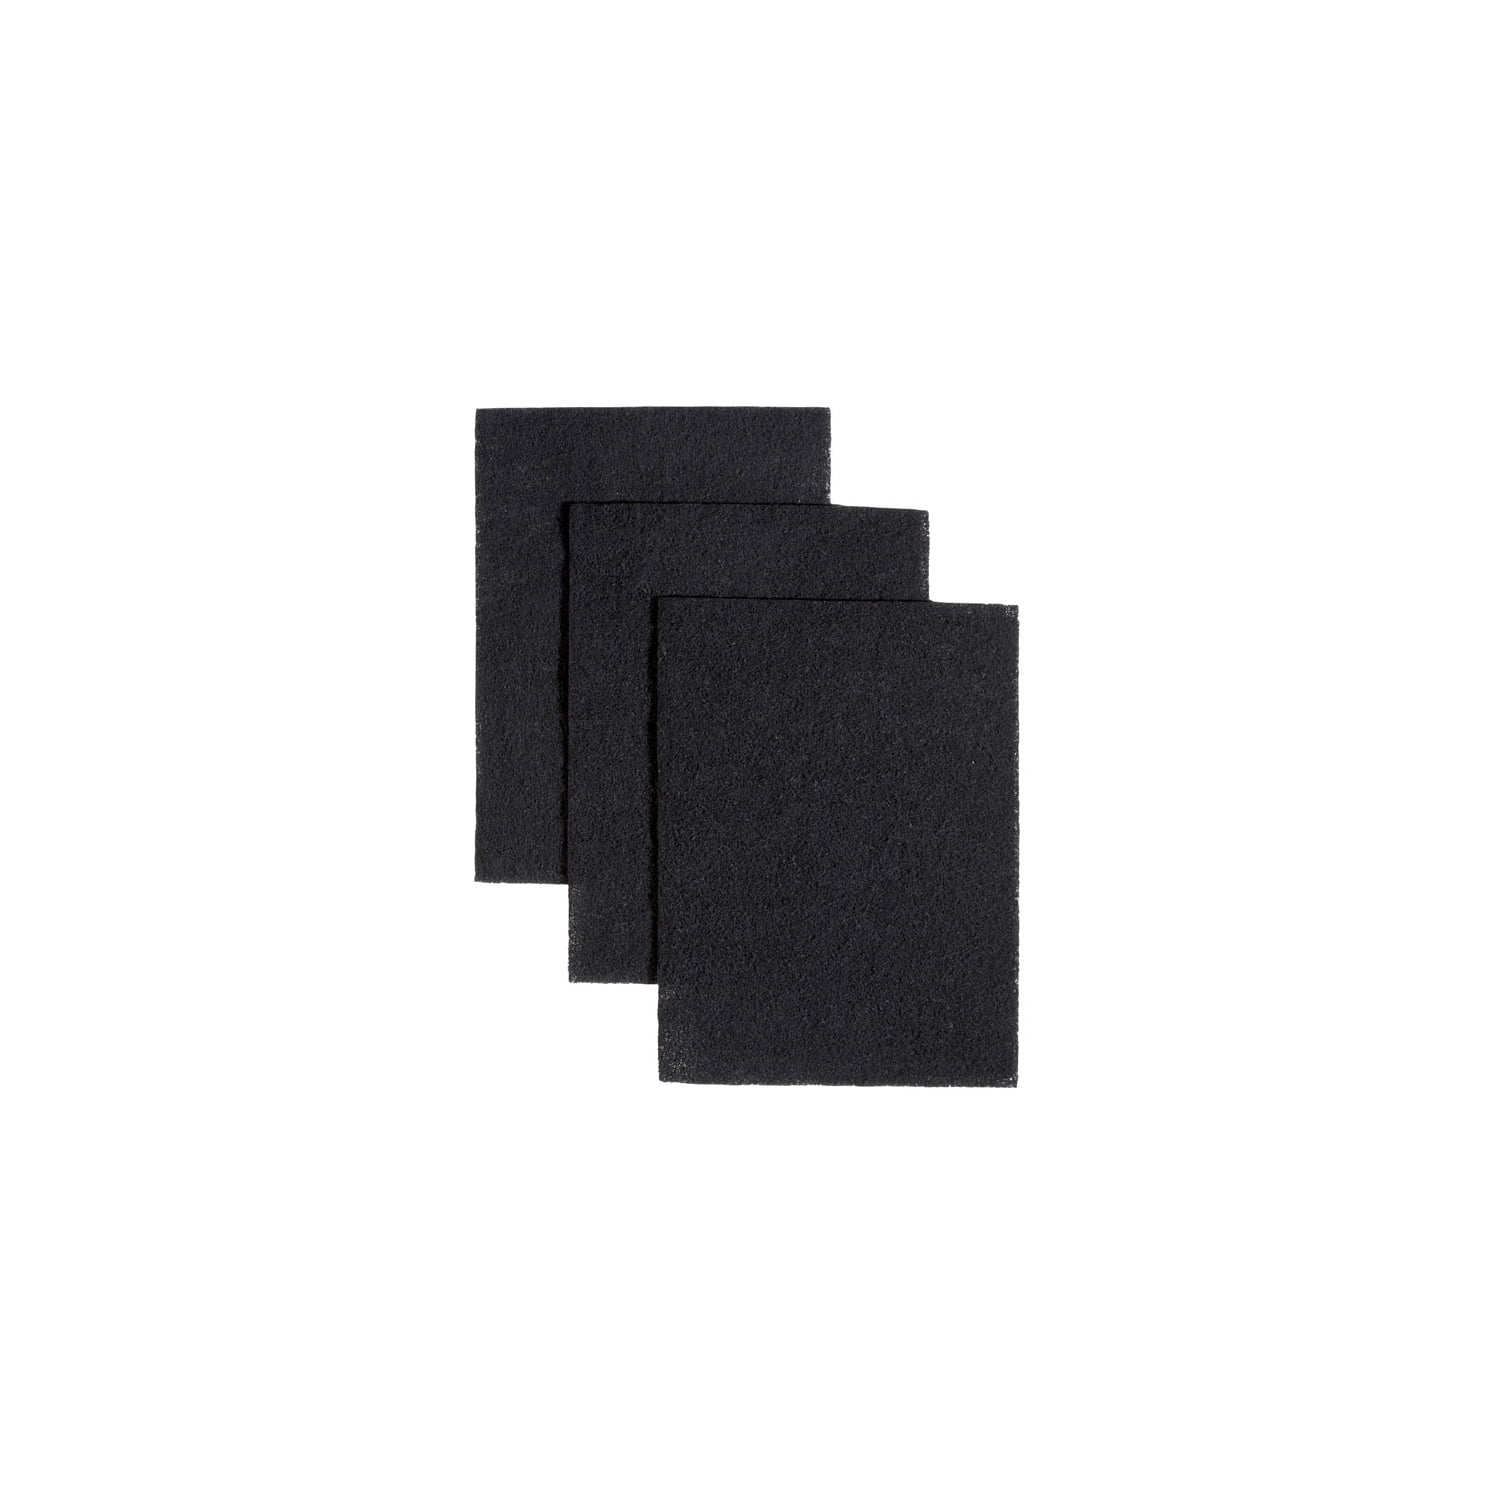 Broan BP58 Non-Ducted Charcoal Replacement Filter Pads for Range Hood